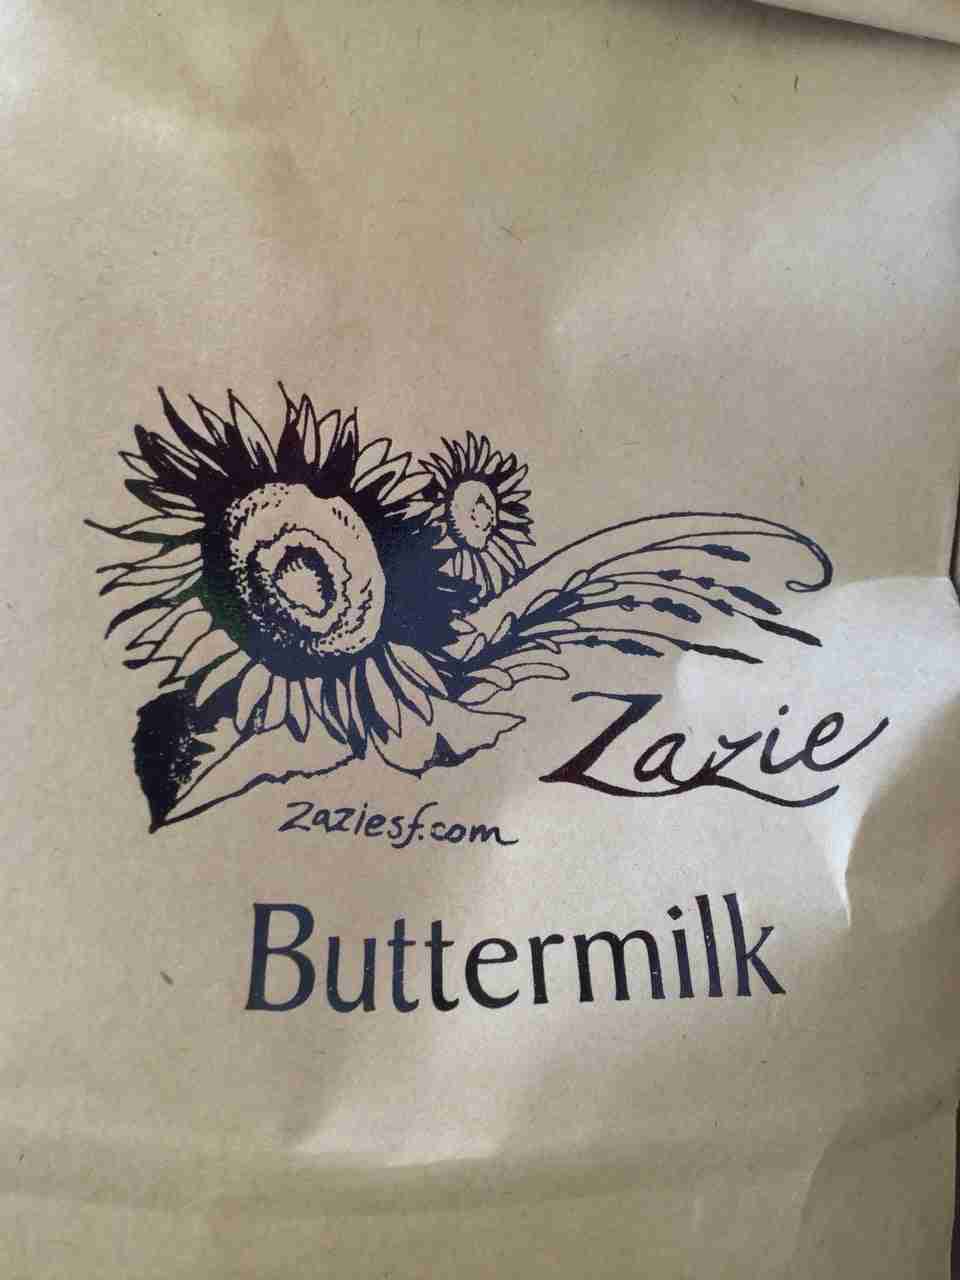 Bag of Zazie buttermilk pancake mix, with a stylized black & white graphic of sunflowers, Zazie, website, and Buttermilk text on the bag.